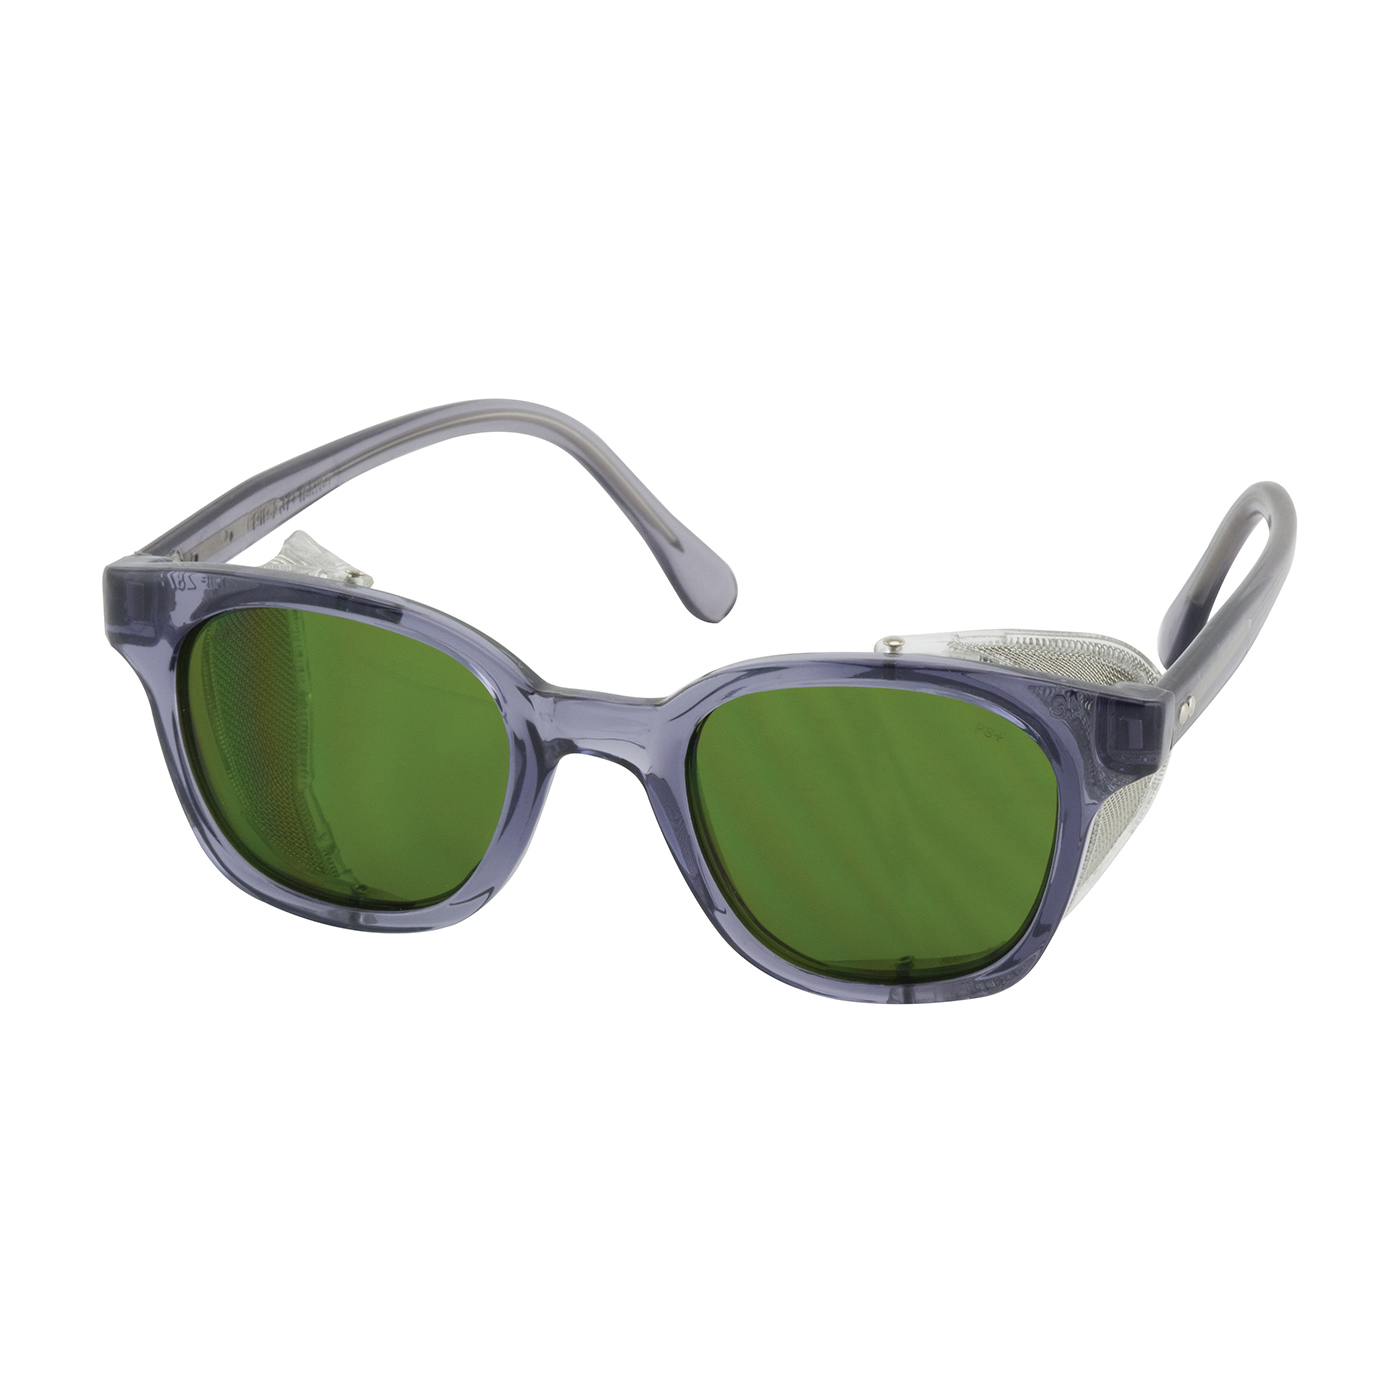 GREEN IR 3.0 5900 SERIES SAFETY GLASSES